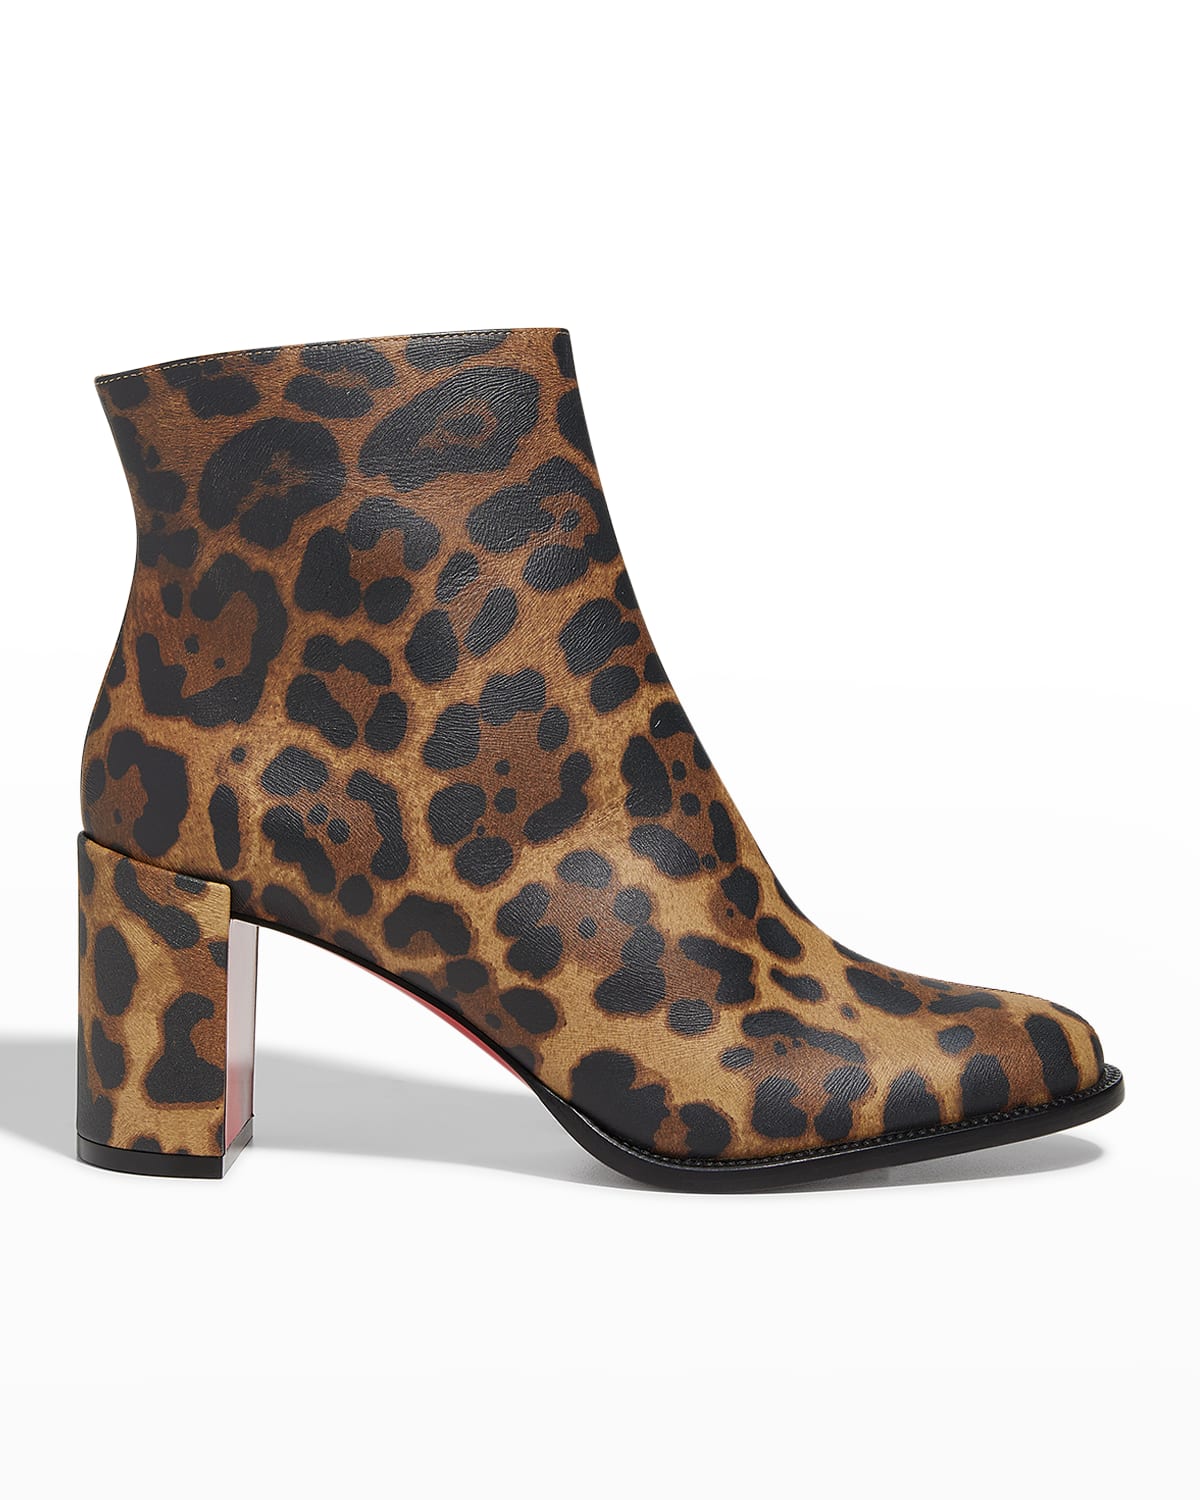 Christian Louboutin Adoxa Leopard-Print Red Sole Booties 